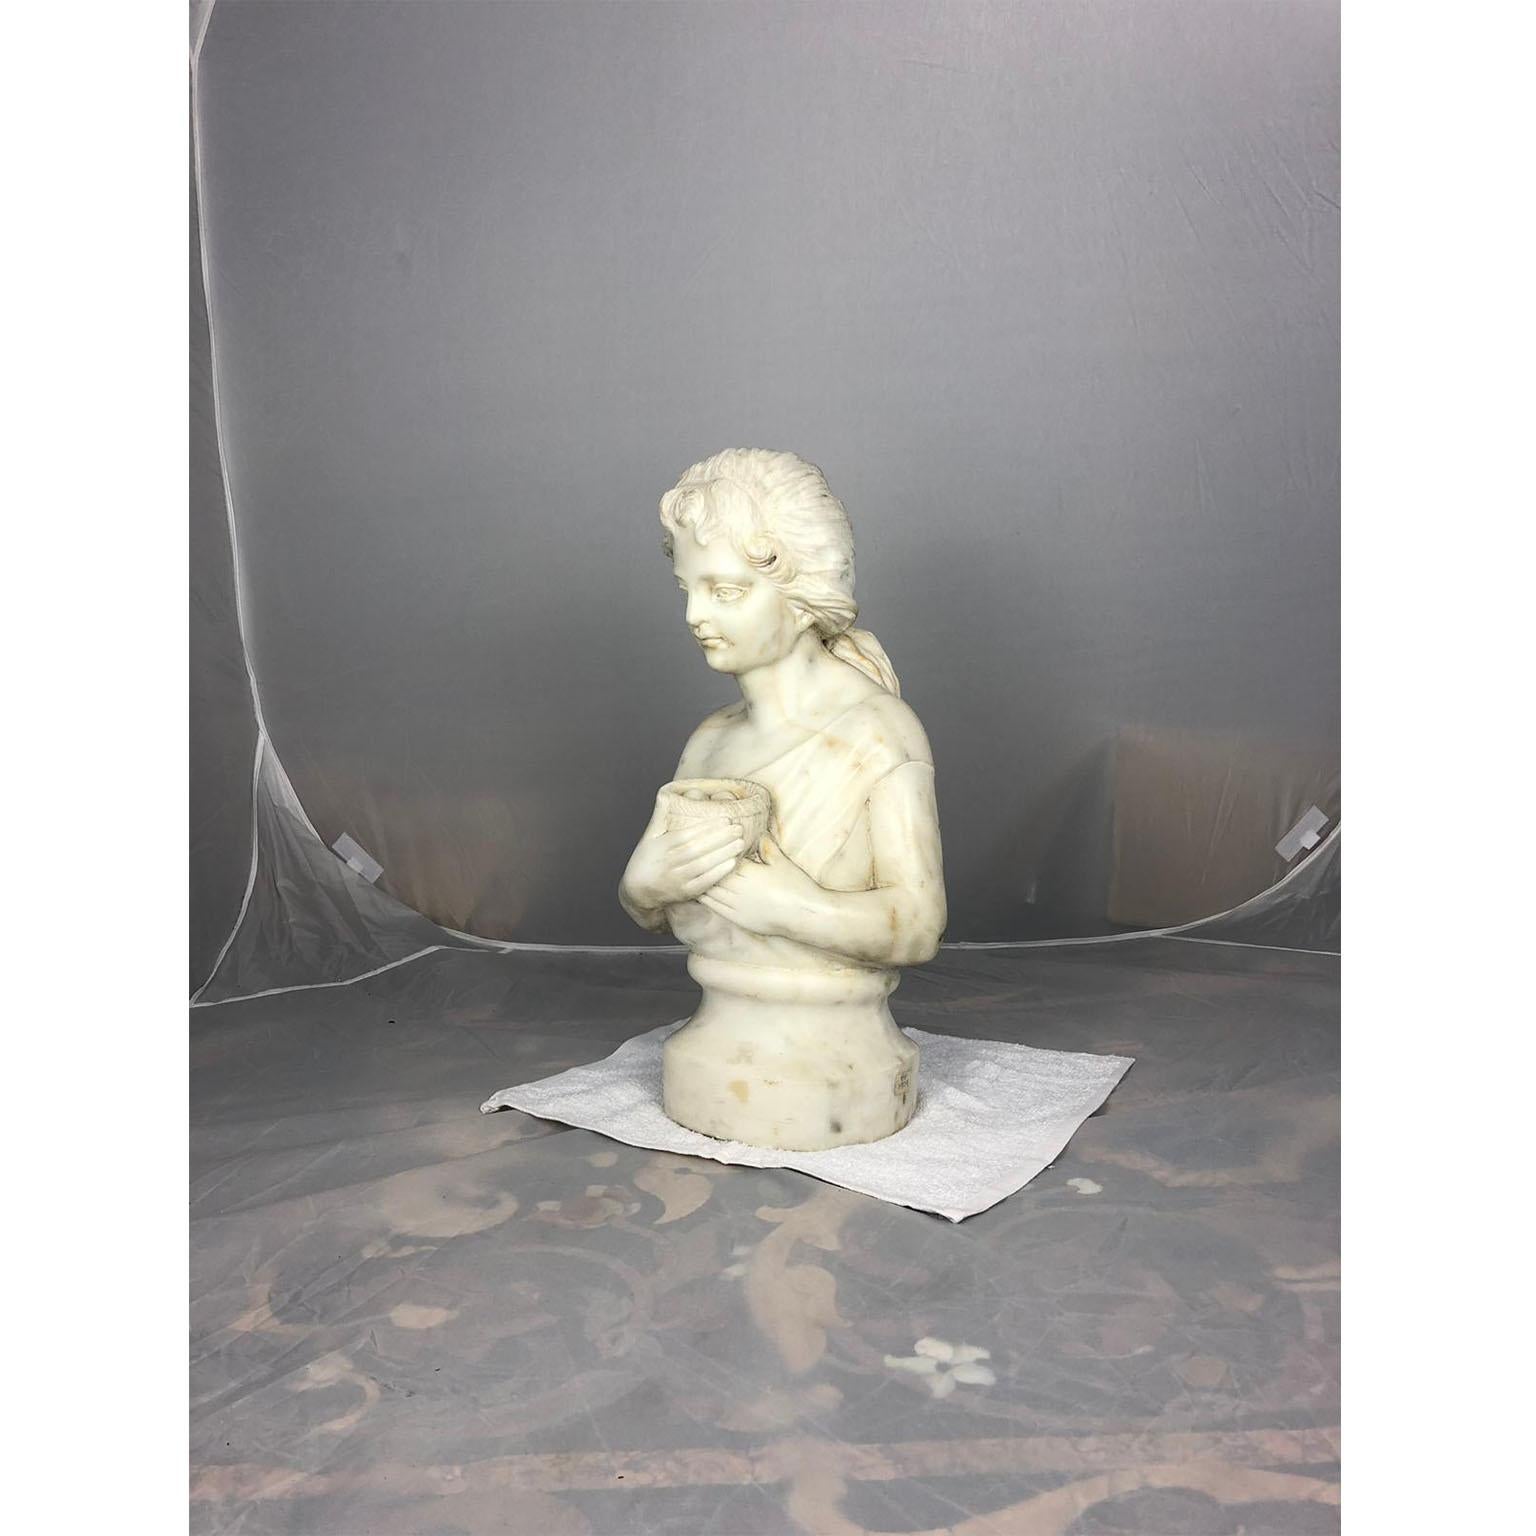 A 19th century marble bust of a child holding a birds nest.
A bird nest is a symbol of the home. It reminds us that we strive to make our home a place where family members grow and prosper. Considered a good luck symbol, the bird nest represents